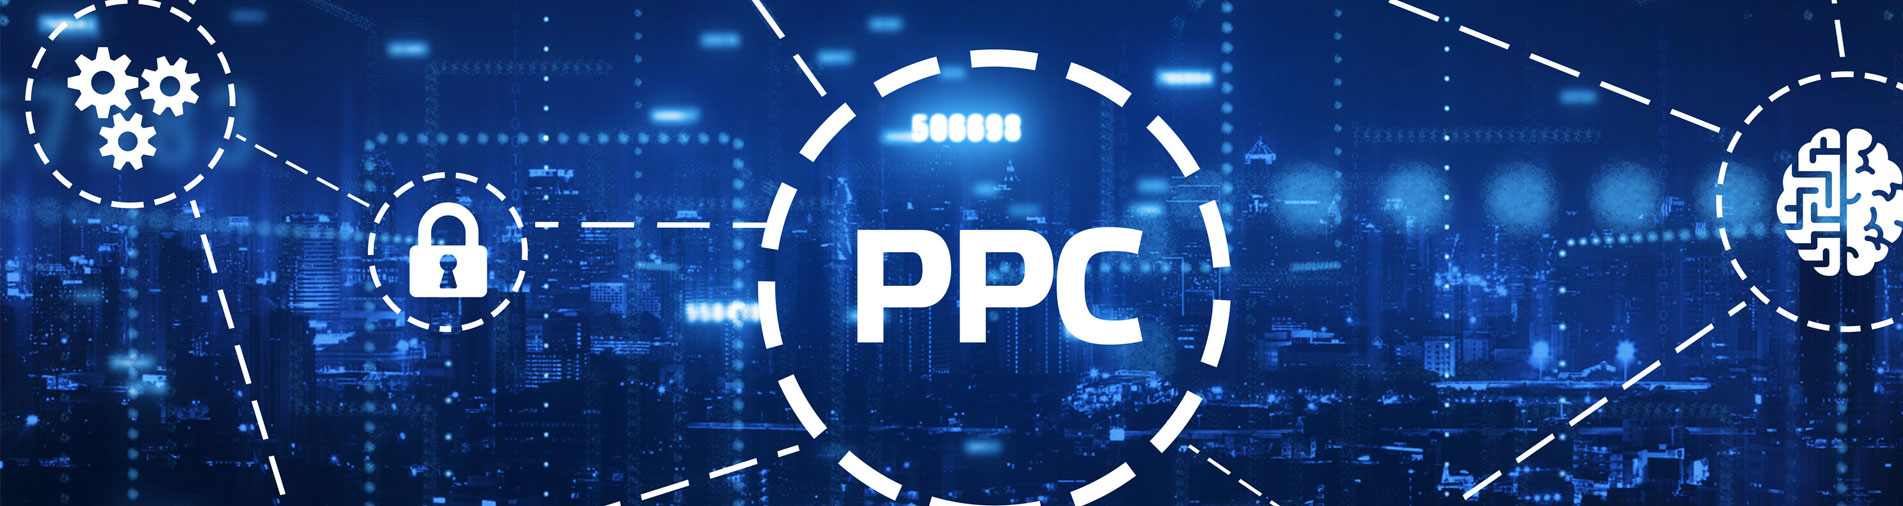 PPC Best Practices that can help Plastic Surgeons Get More Clients [Infographic]